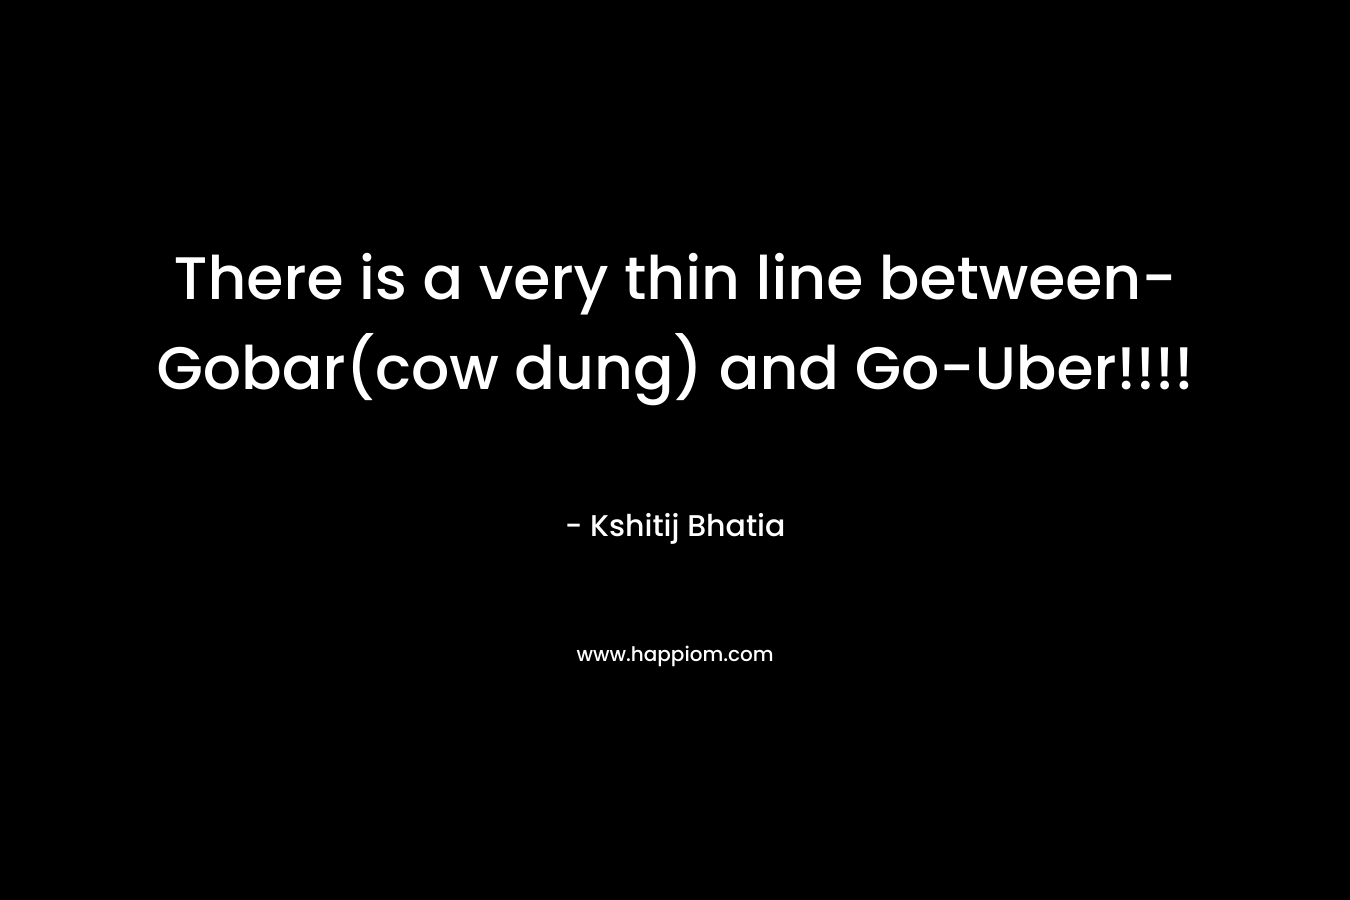 There is a very thin line between- Gobar(cow dung) and Go-Uber!!!! – Kshitij Bhatia